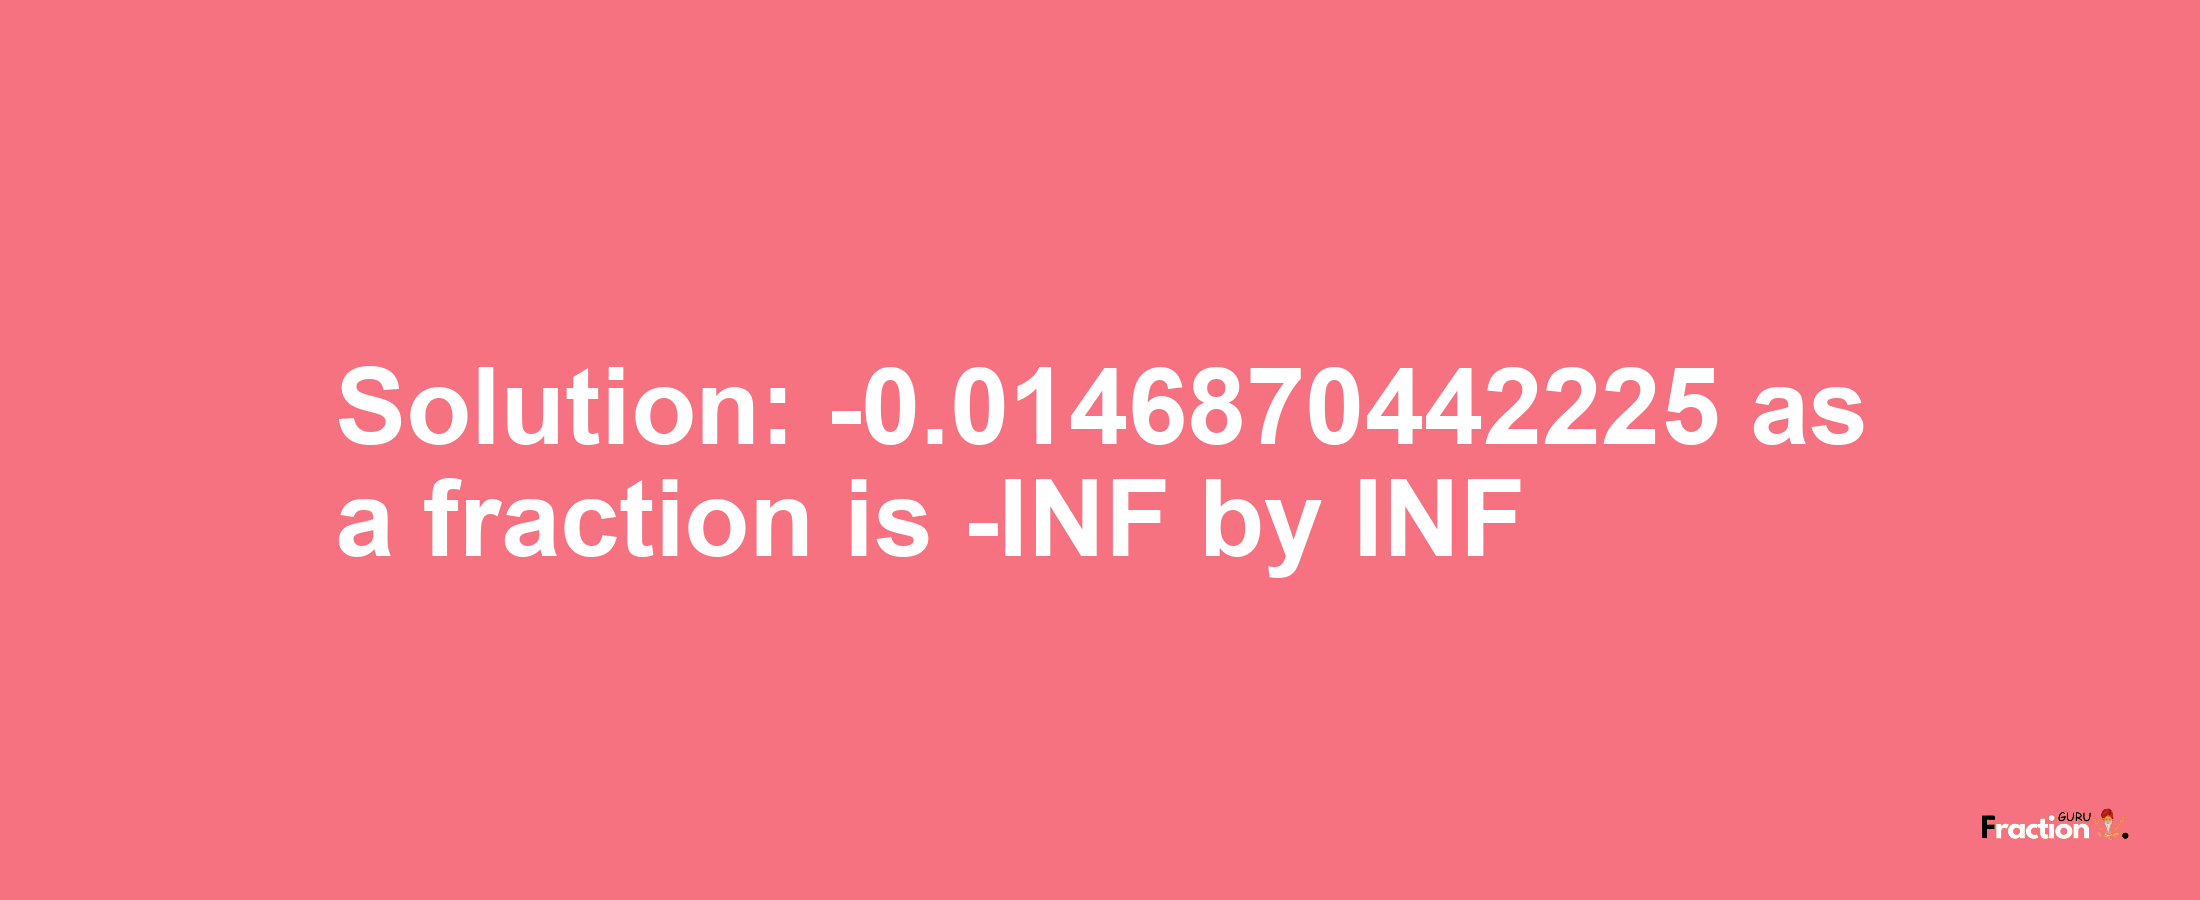 Solution:-0.0146870442225 as a fraction is -INF/INF